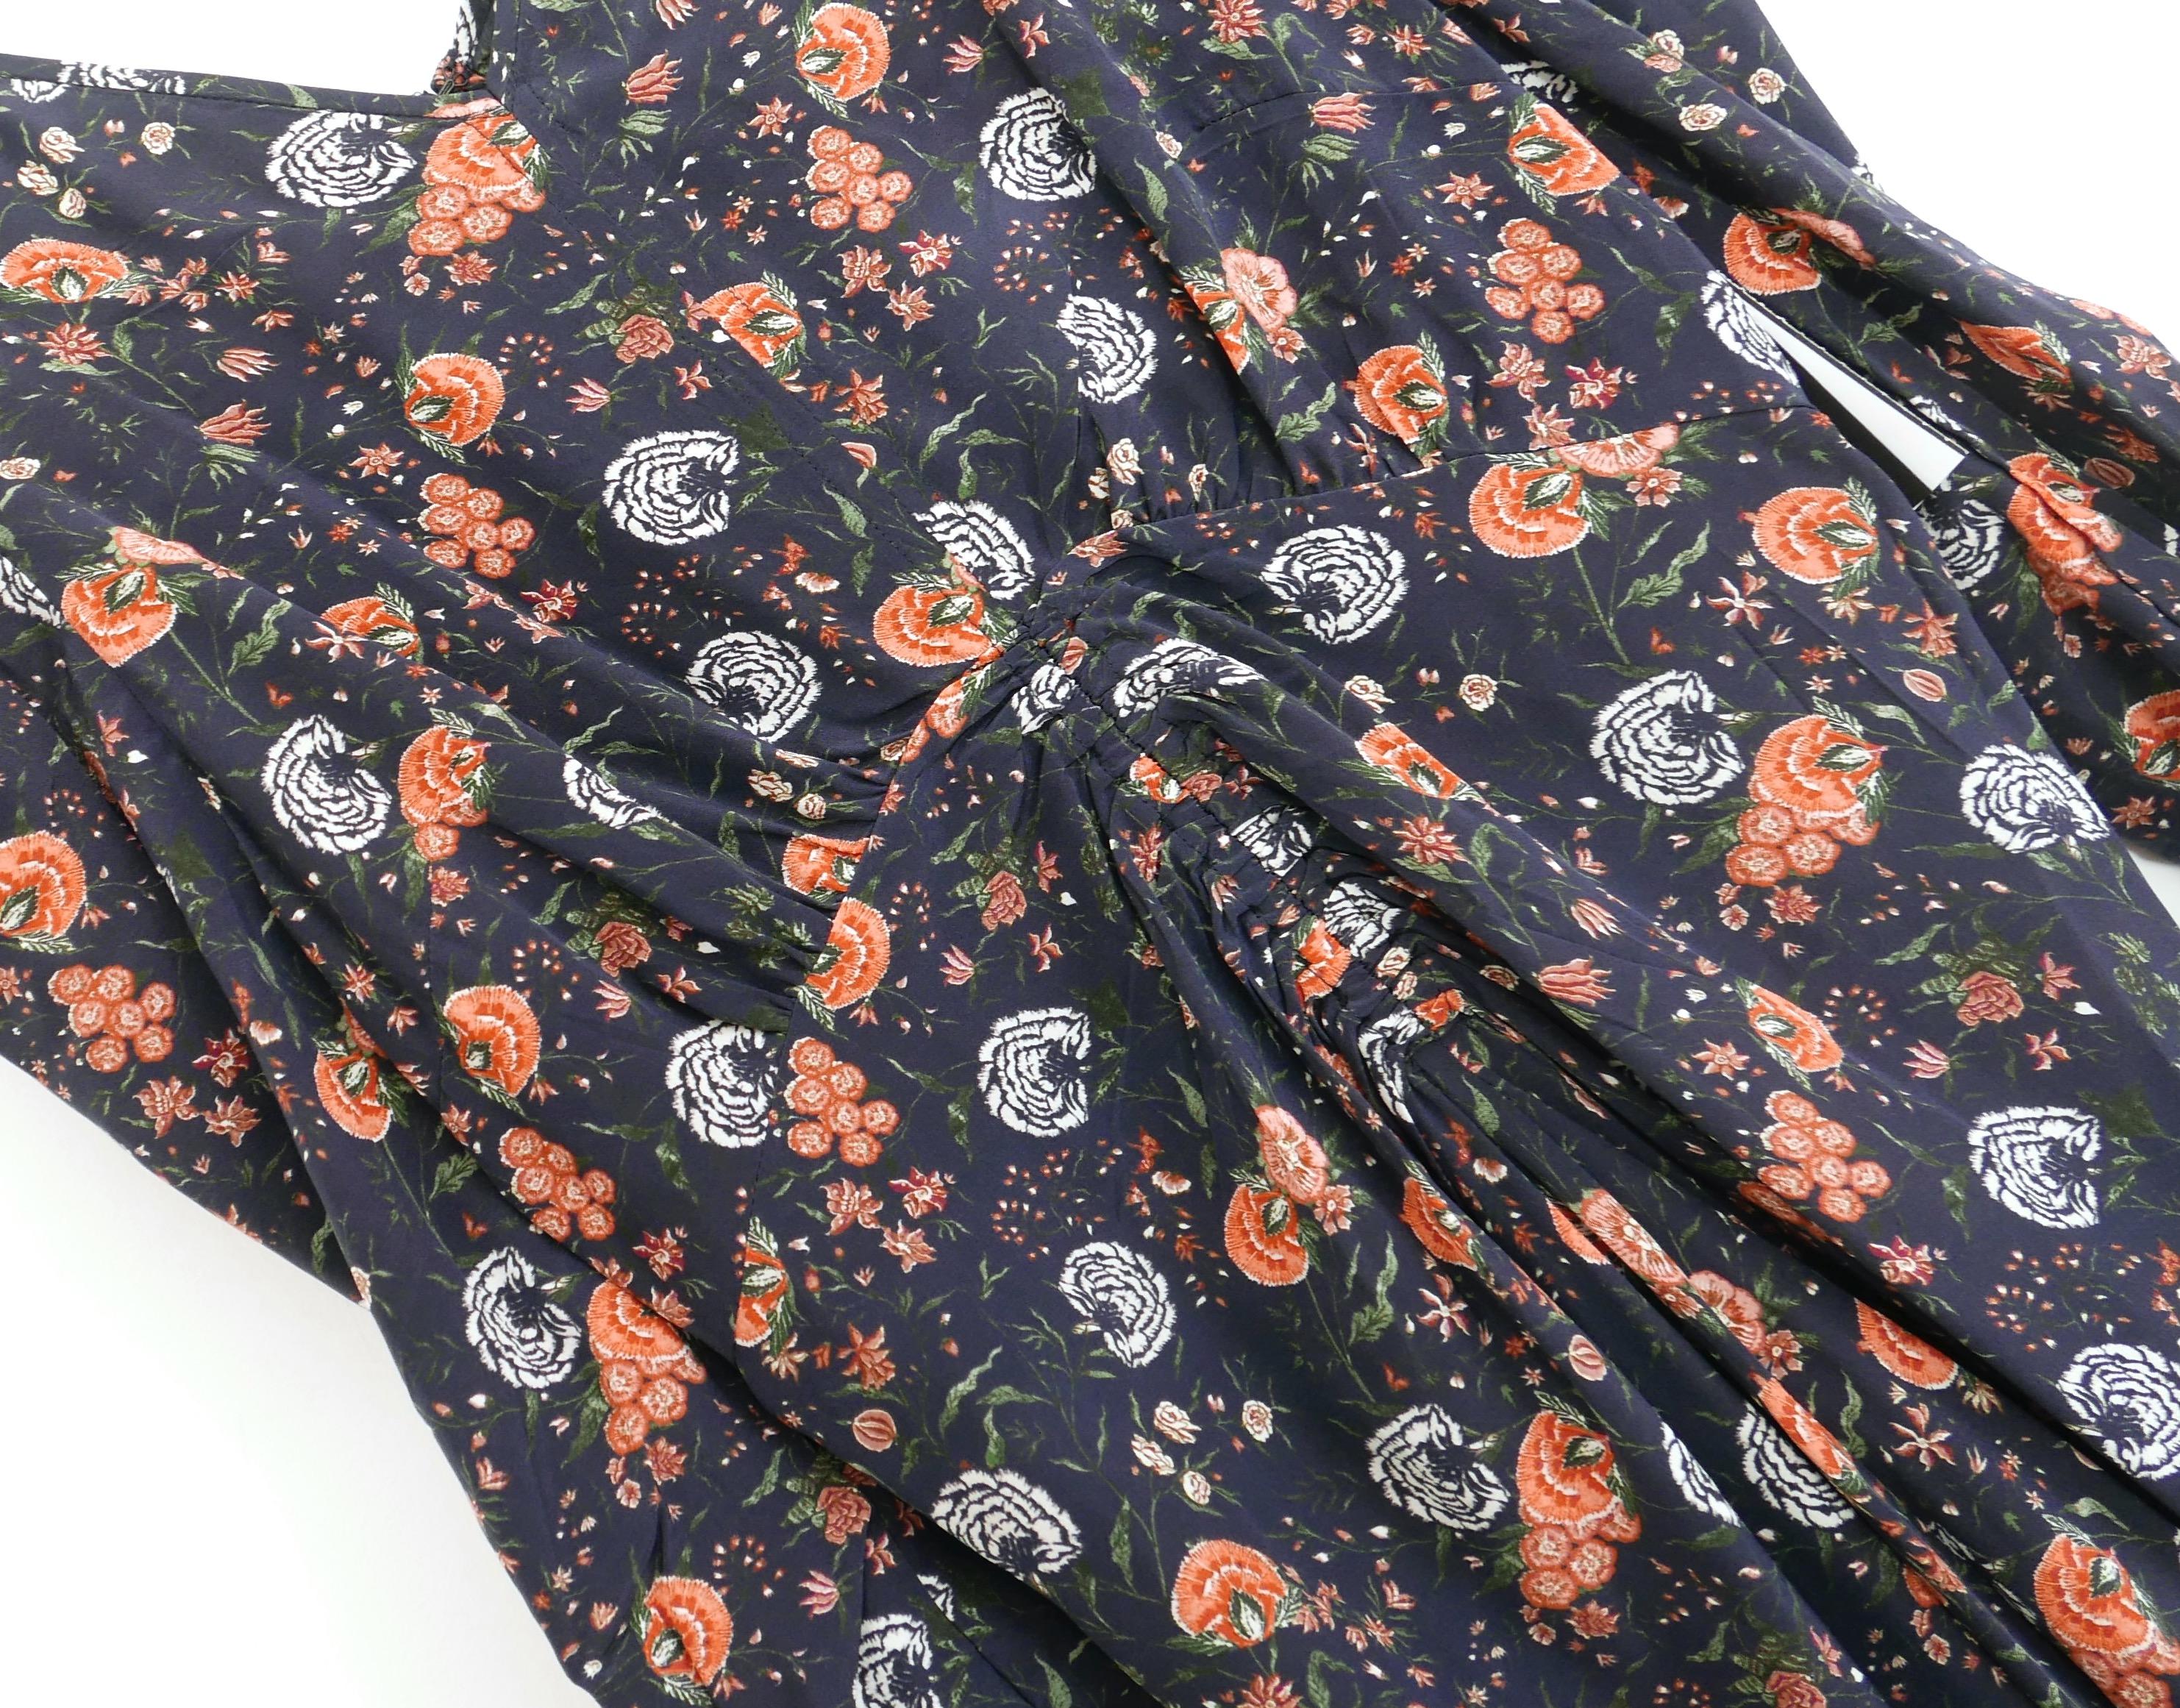 Signature Isabel Marant Albini dress - bought for €940 and new with tag. Made from Midnight navy floral carnation print jacquard silk, it has a super flattering cut with soft fit over the bust, ruched front, v neck and cropped ruched sleeves with